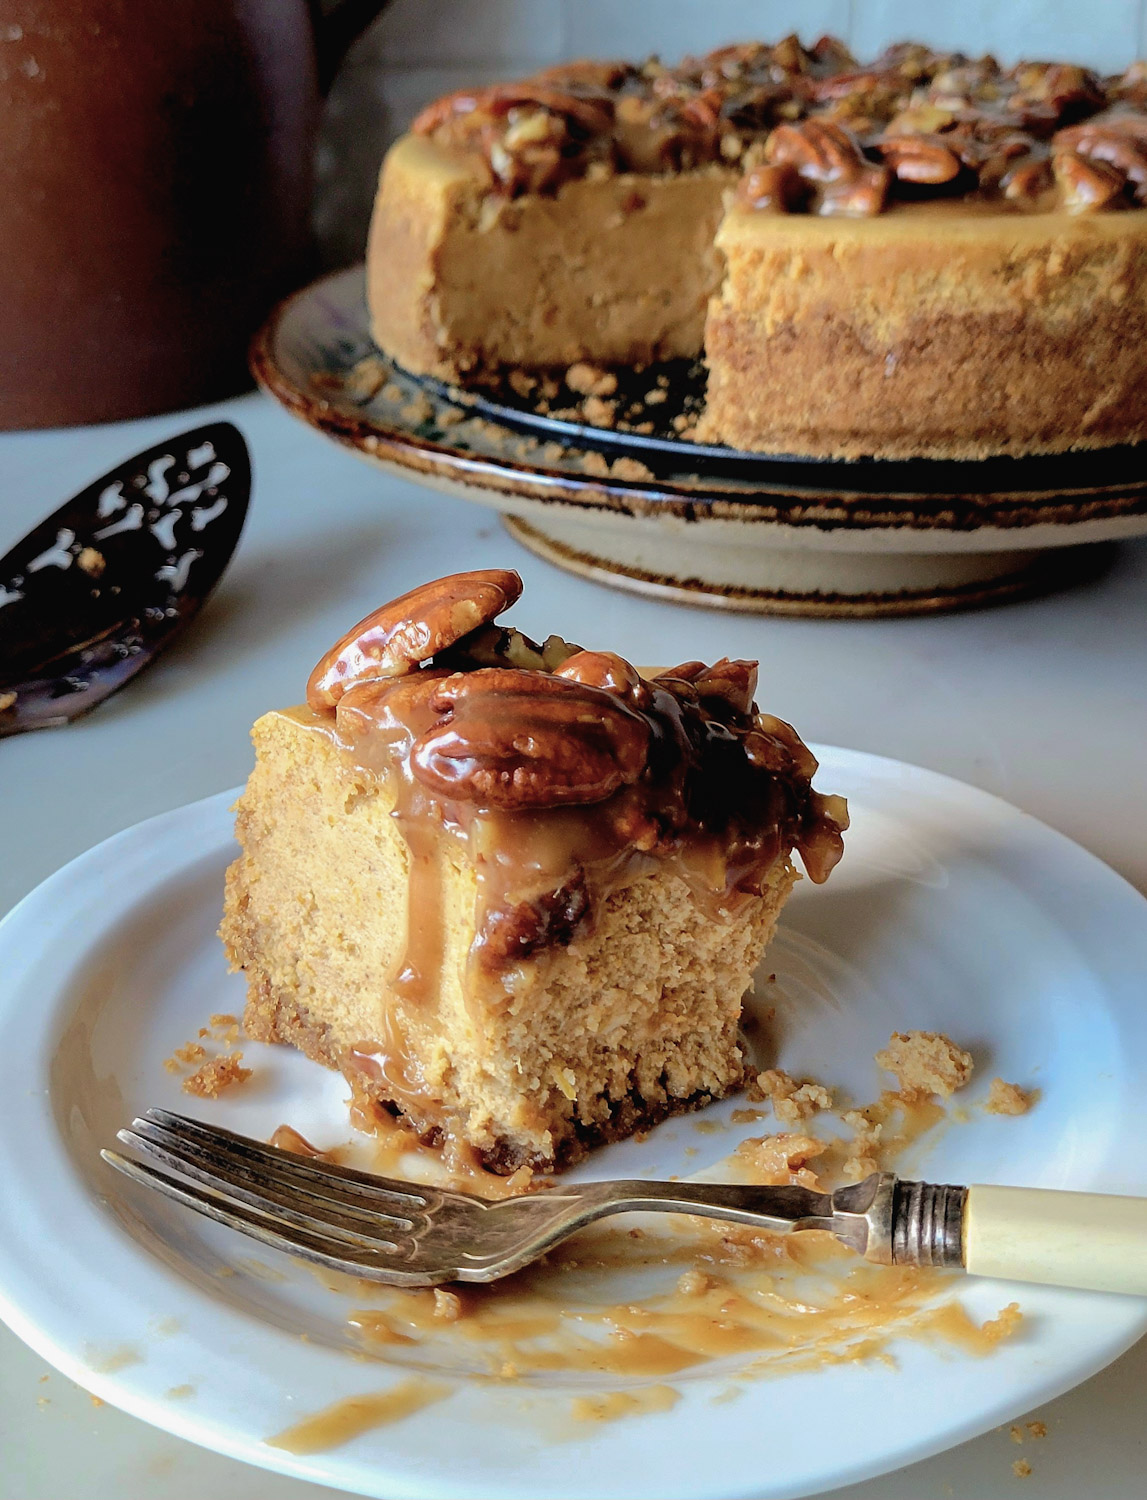 A slice of partially eaten Pecan Praline Pumpkin Cheesecake in on a plate with a fork, the rest of the cake in the background.